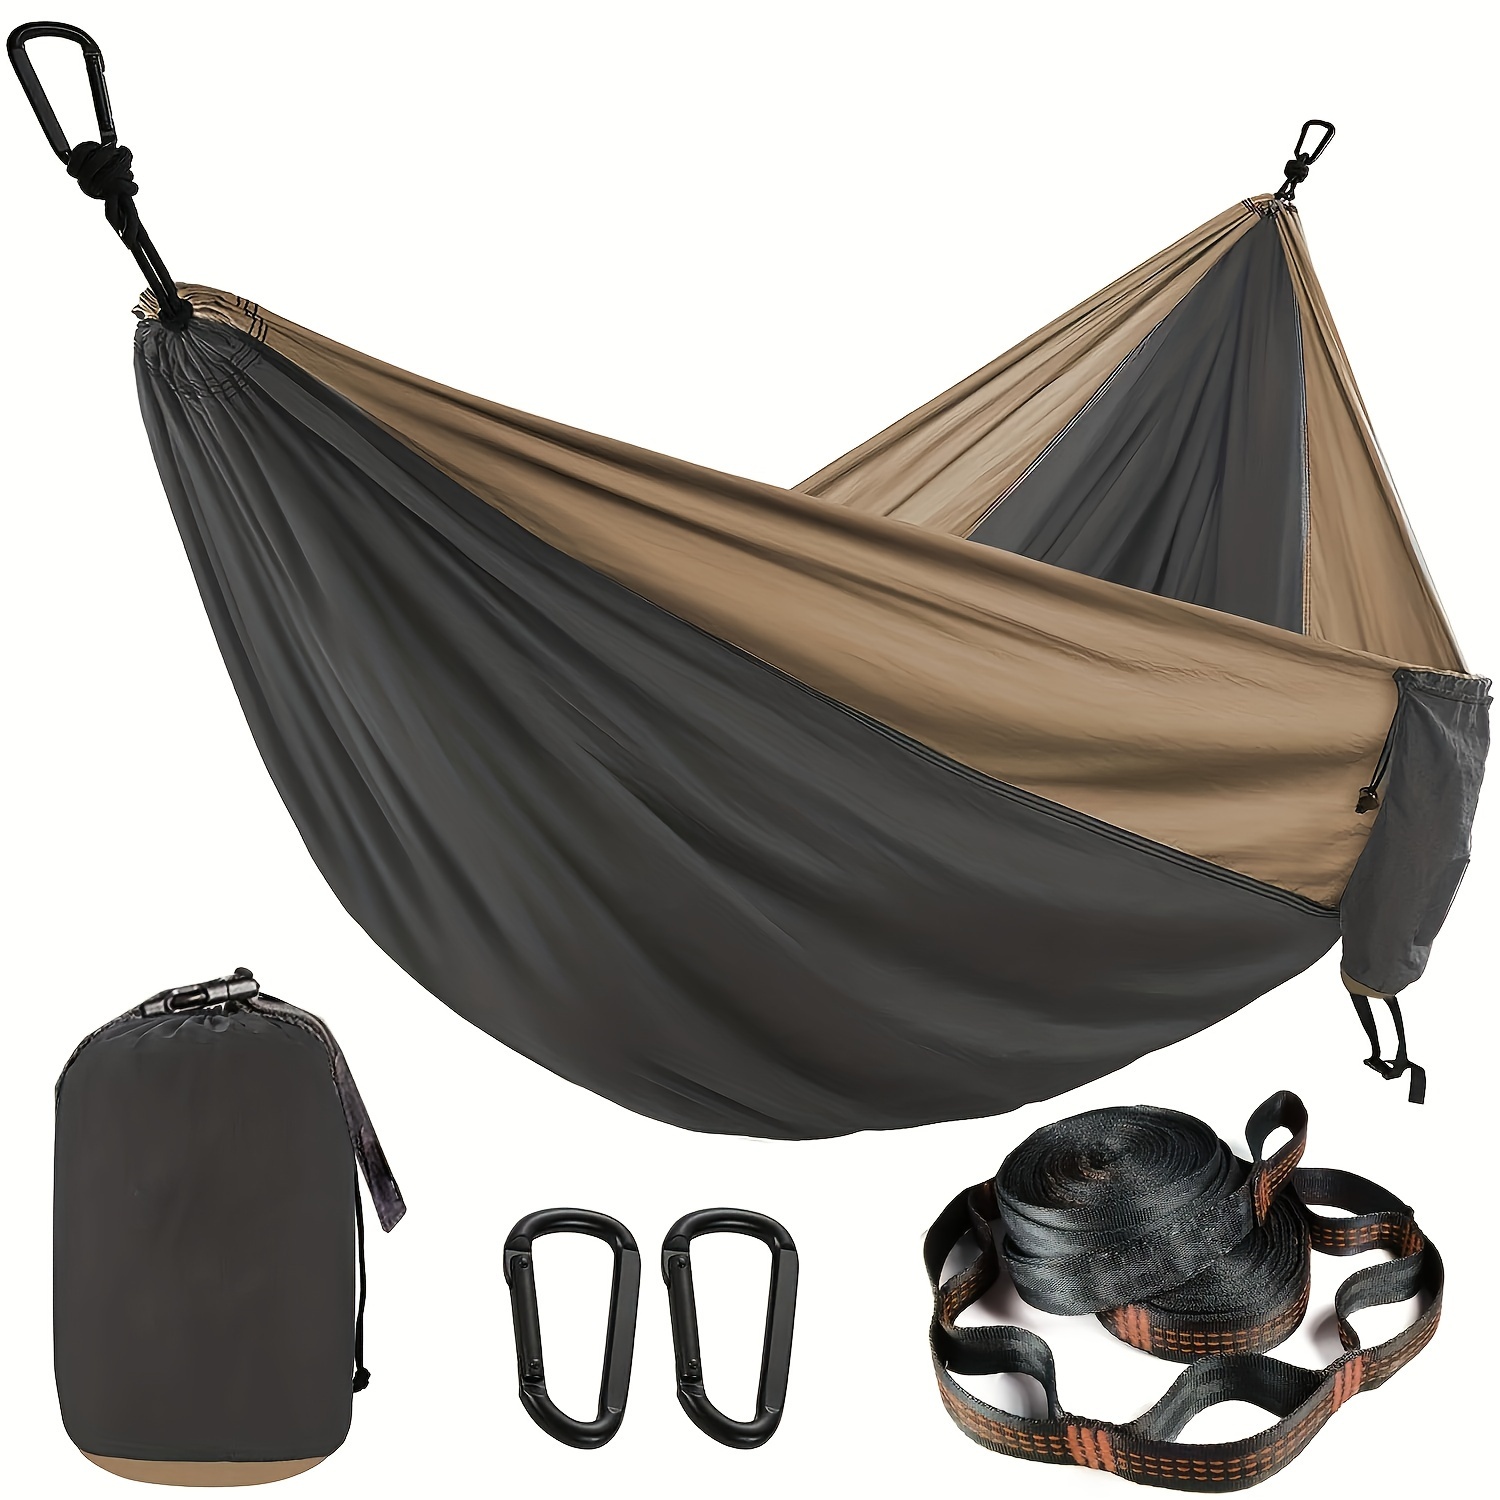 

1pc, Camping Hammock, 2-person Hammock With Hammock Straps And Black Carabiners, Ideal For Outdoor Travel, Portable With Carry Bag